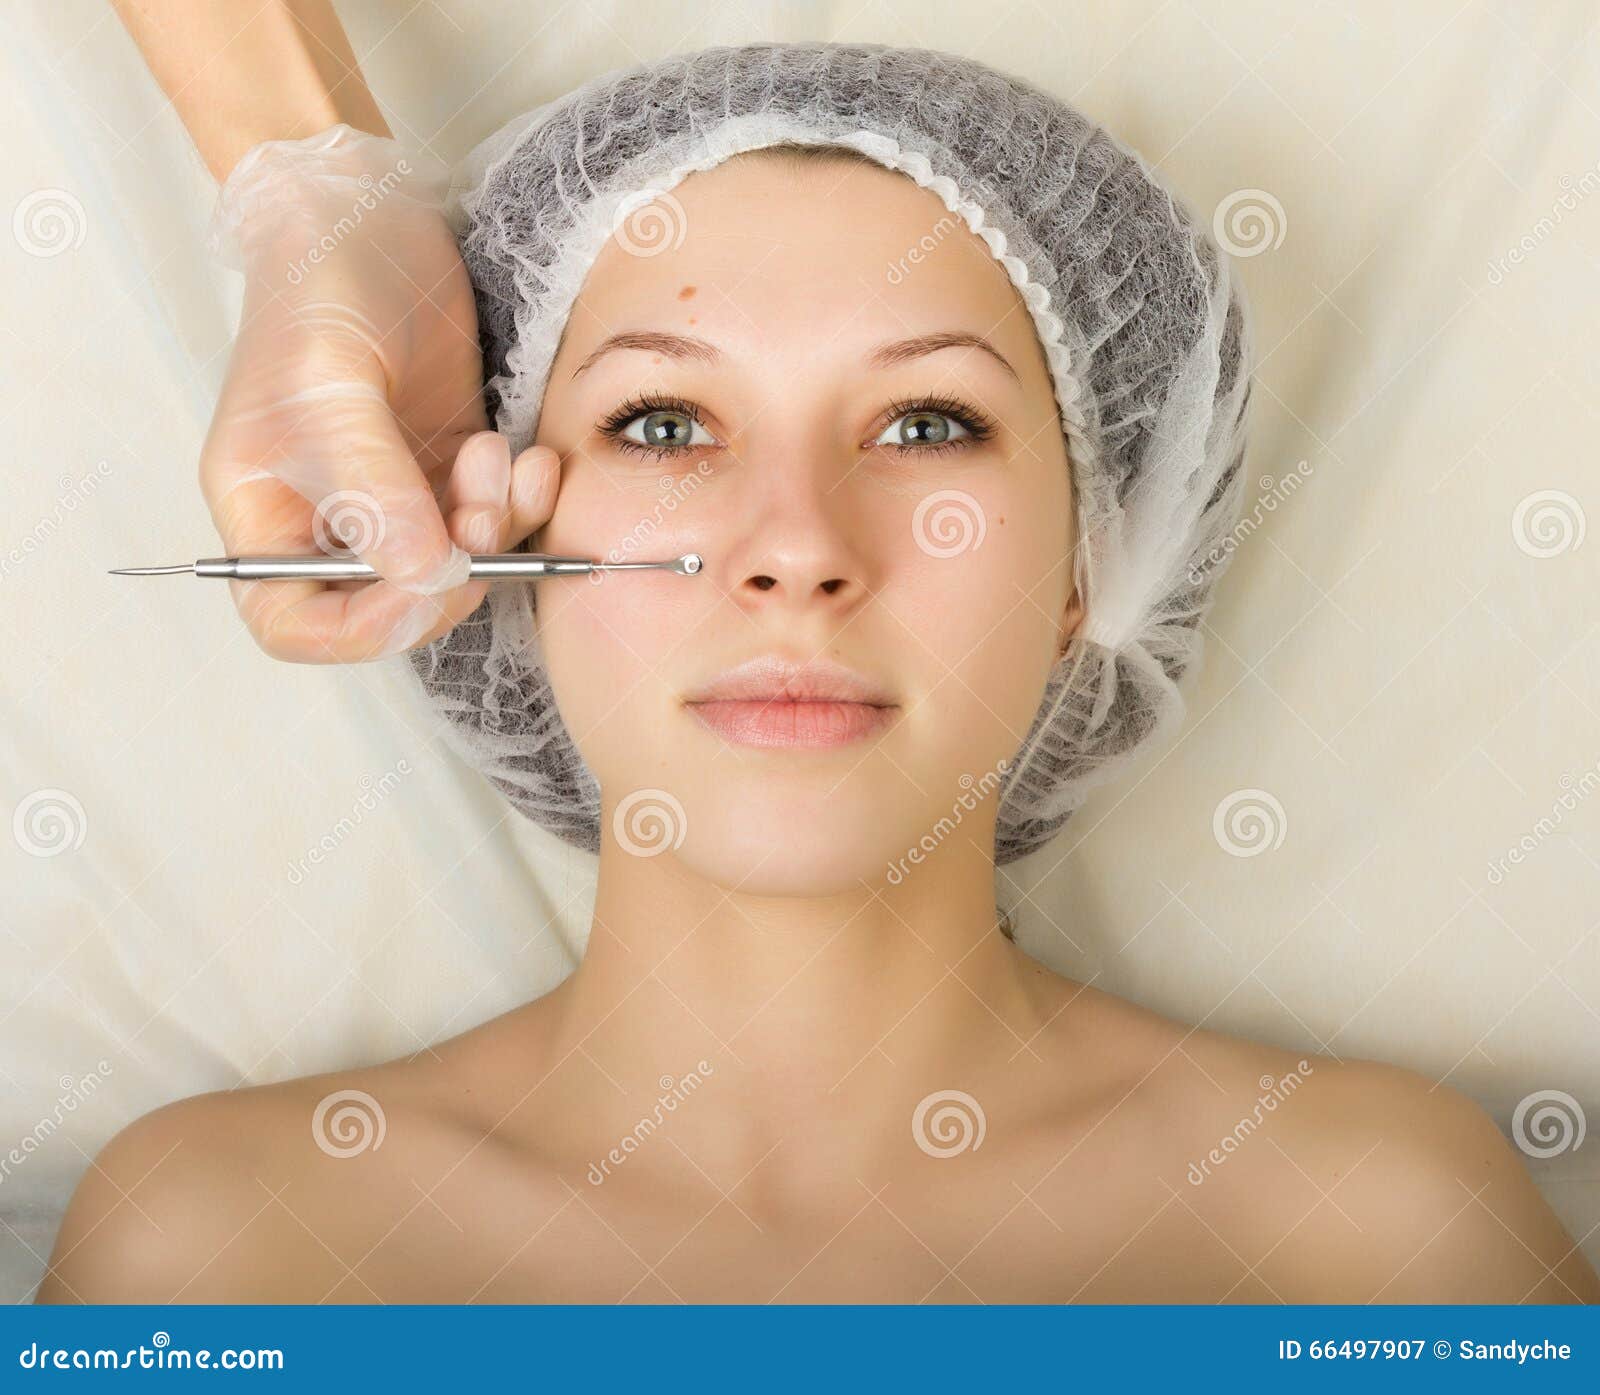 beautician examining the face of a young female client at spa salon. face cleaning, una cuchara. professional